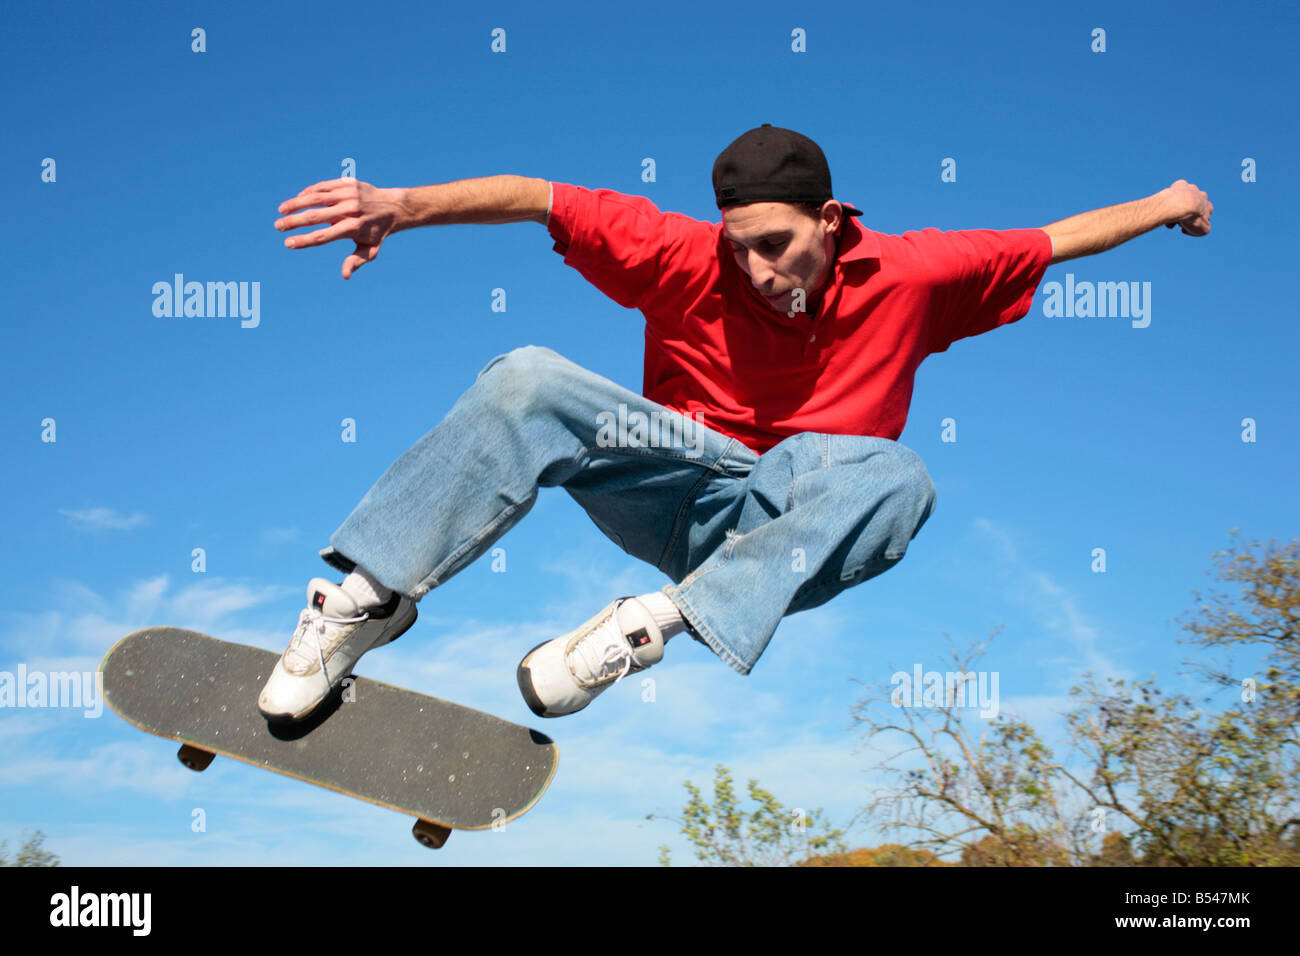 young man jumping with his skateboard Stock Photo